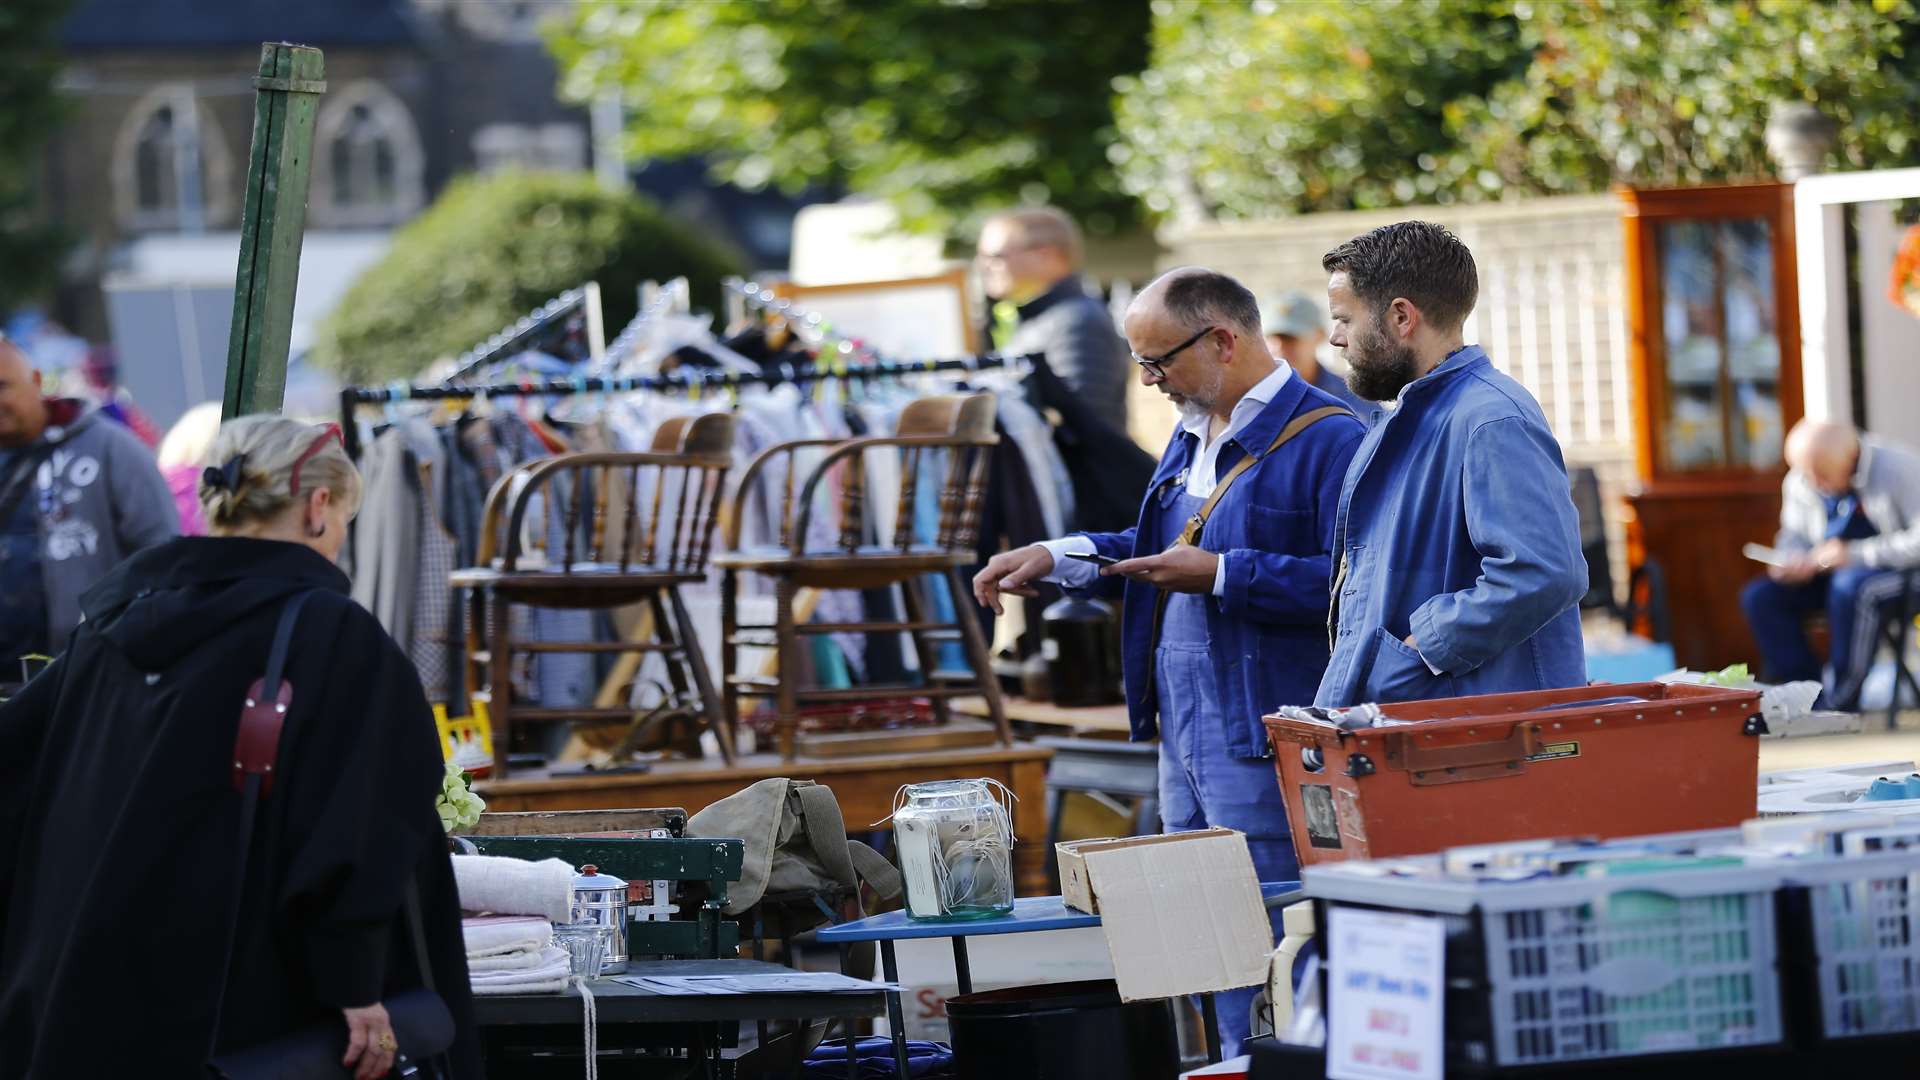 The weather stayed fine for Deal Braderie where thousands of bargains were had